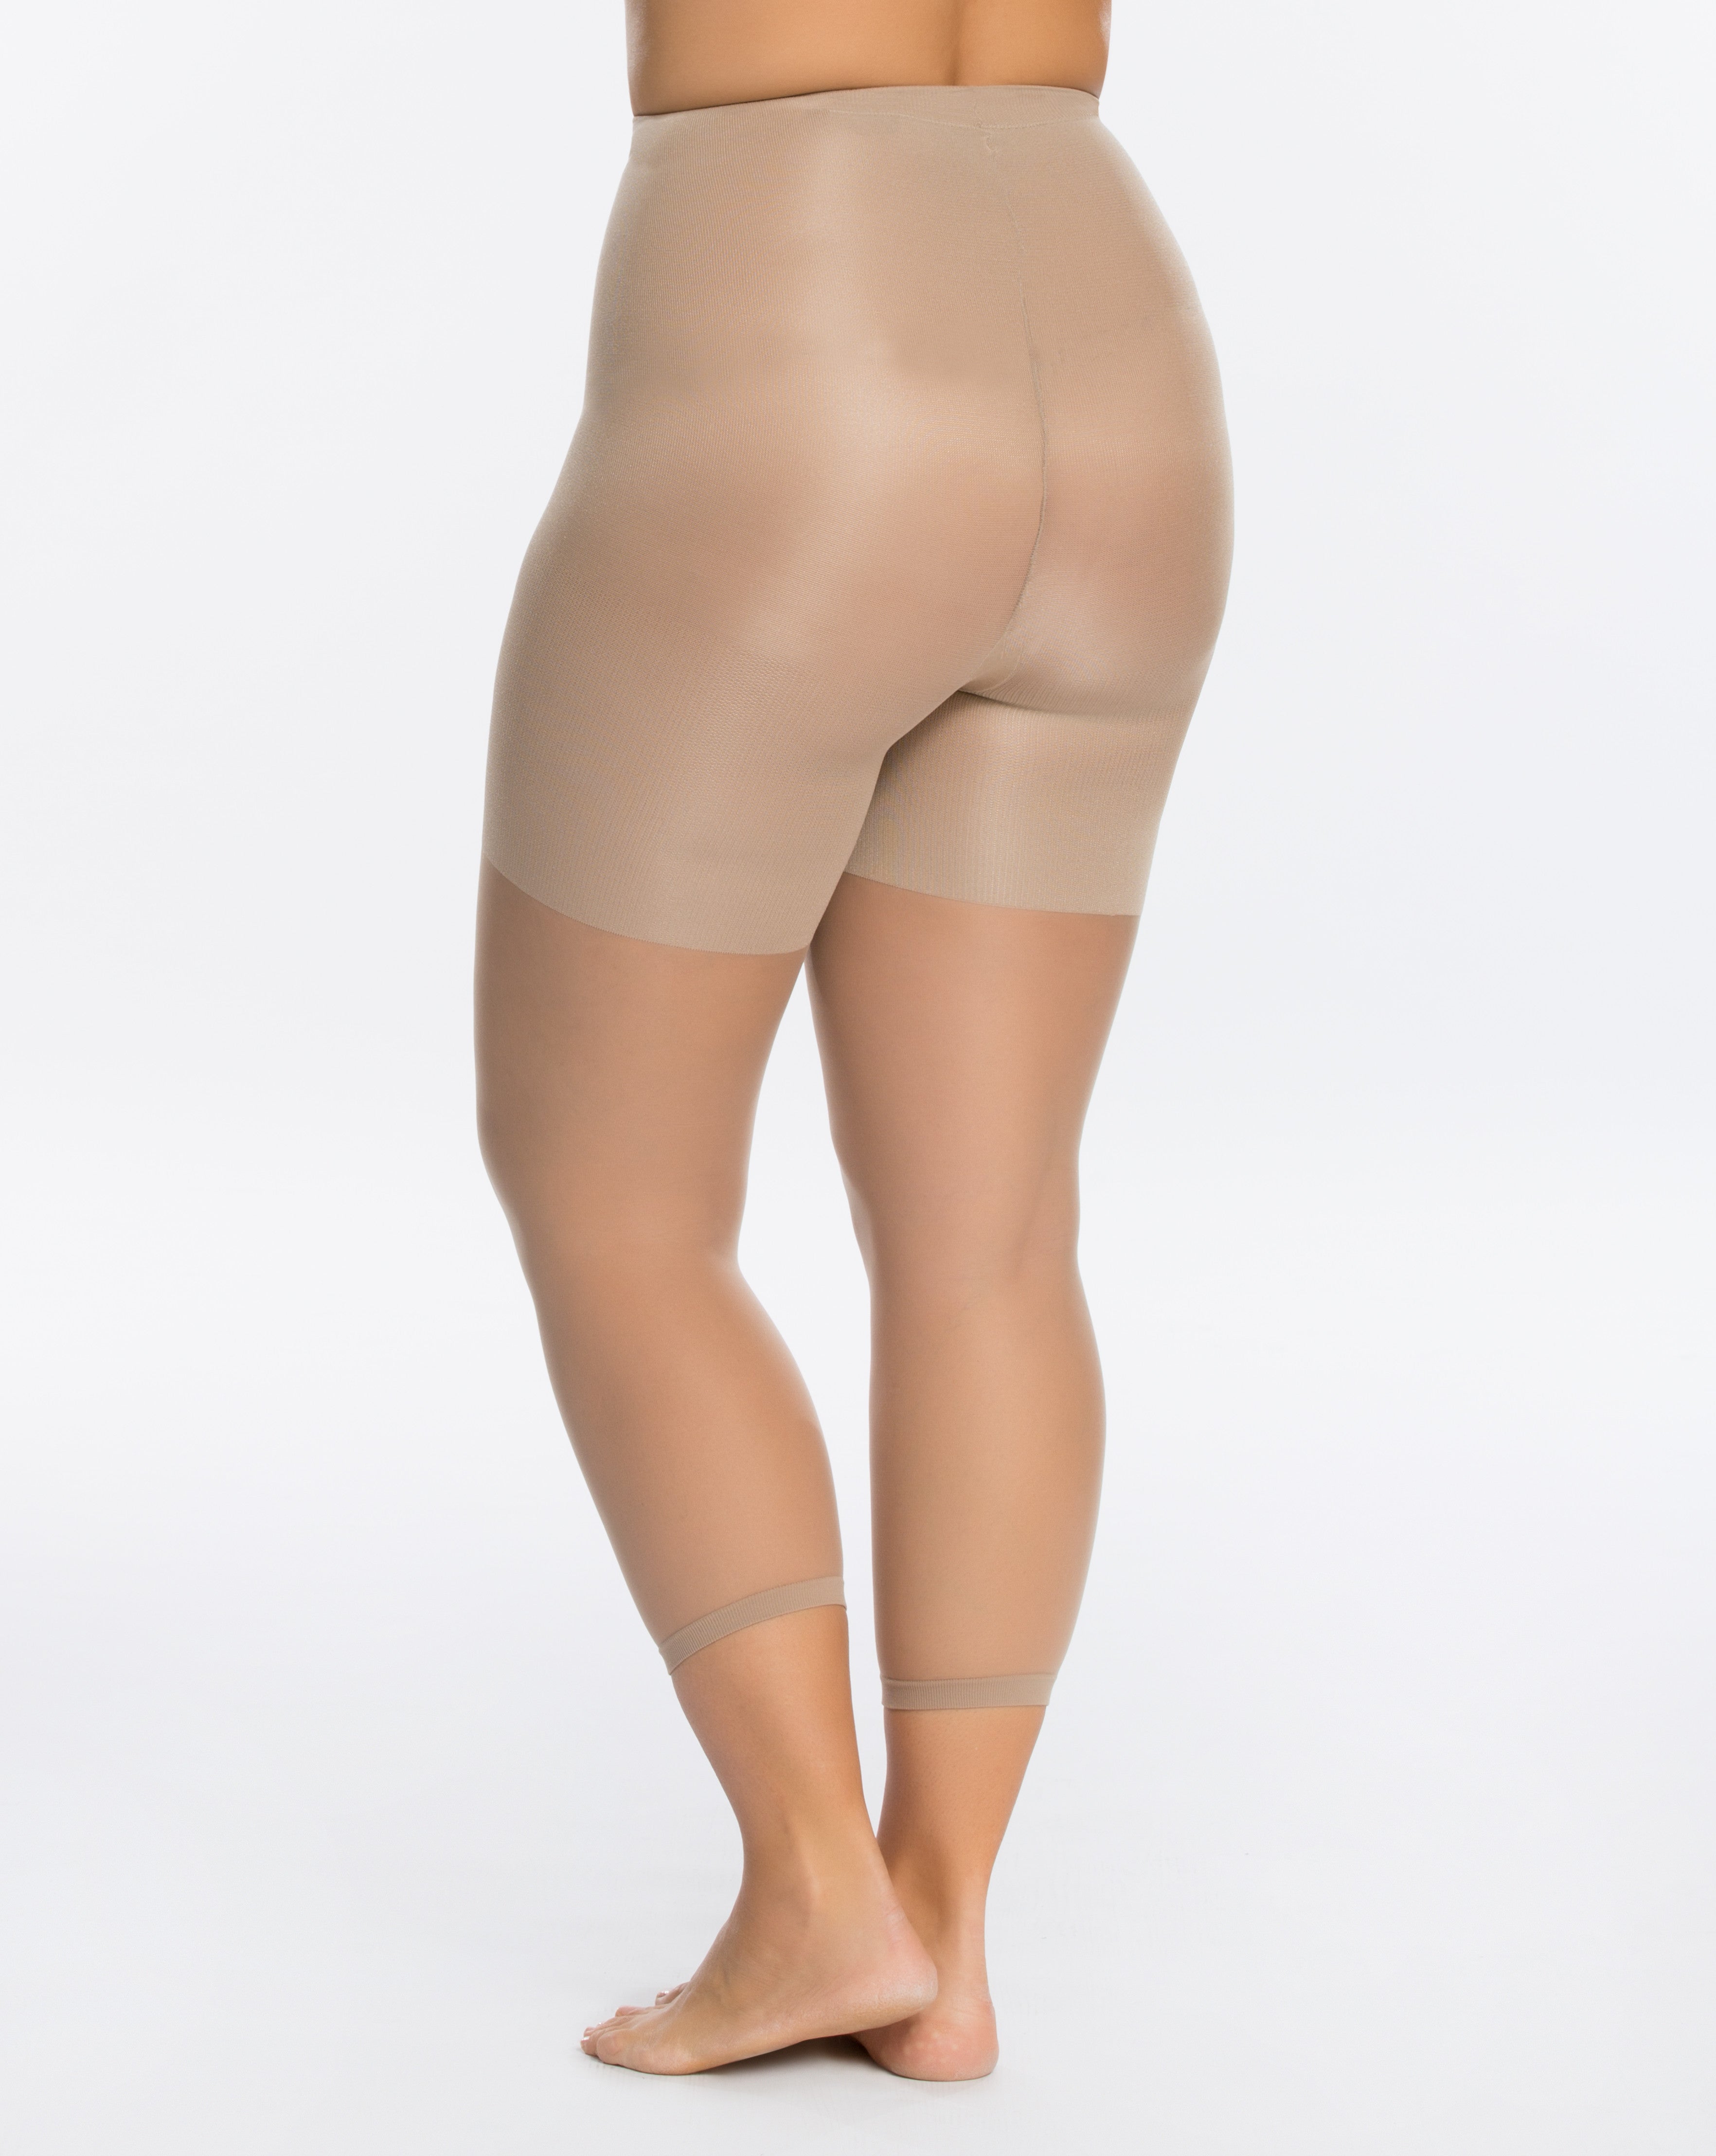 New NIP SPANX Footless Nude 1 Size E Super Control Body Shaping